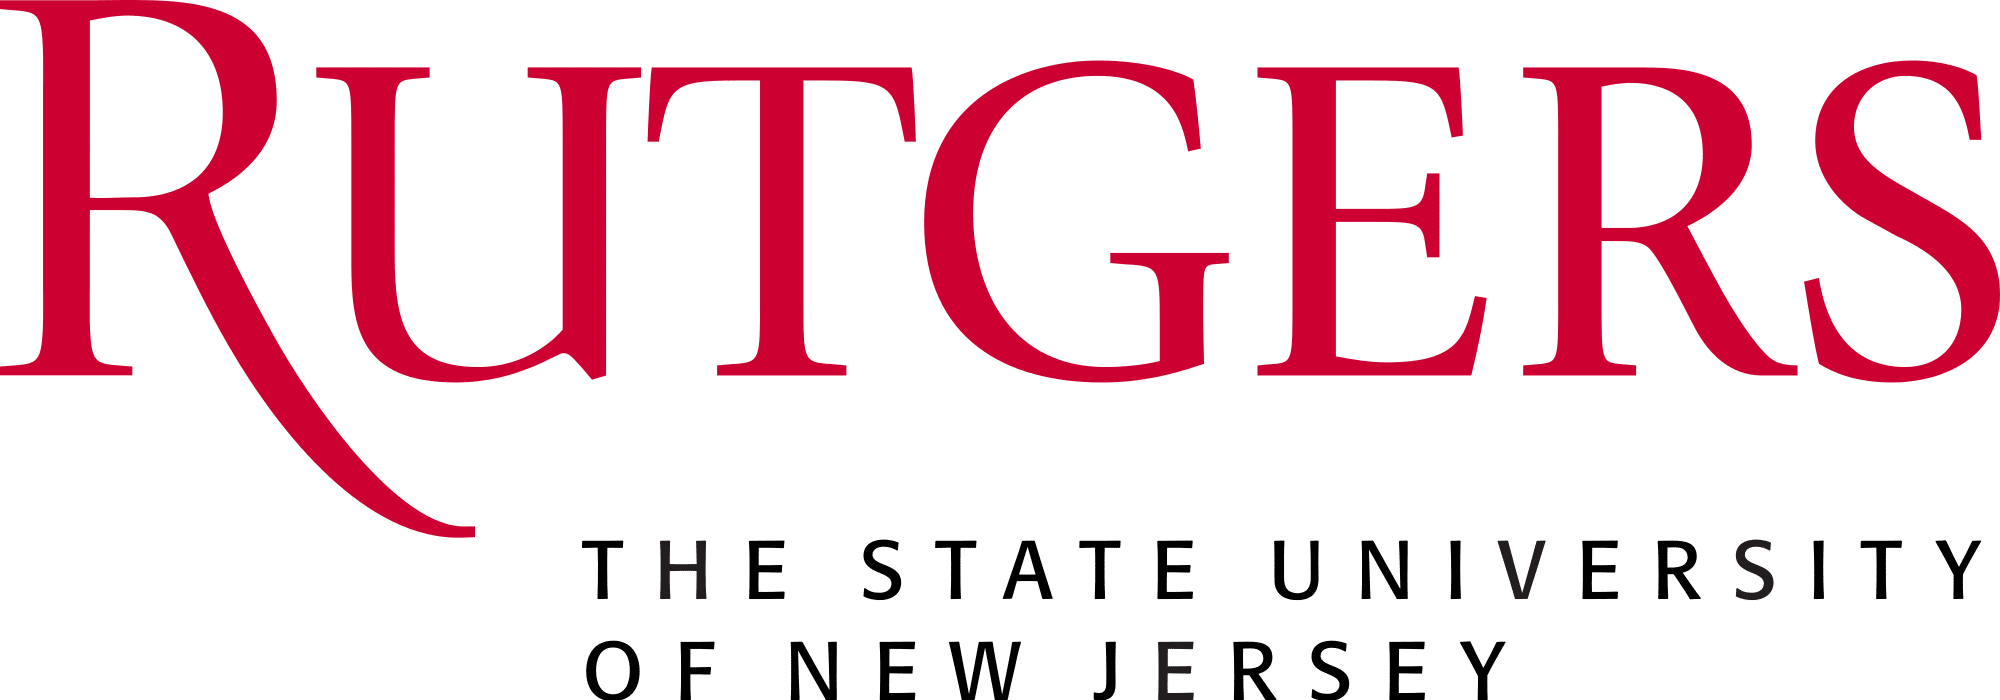 Logo reading Rutgers The State University of New Jersey